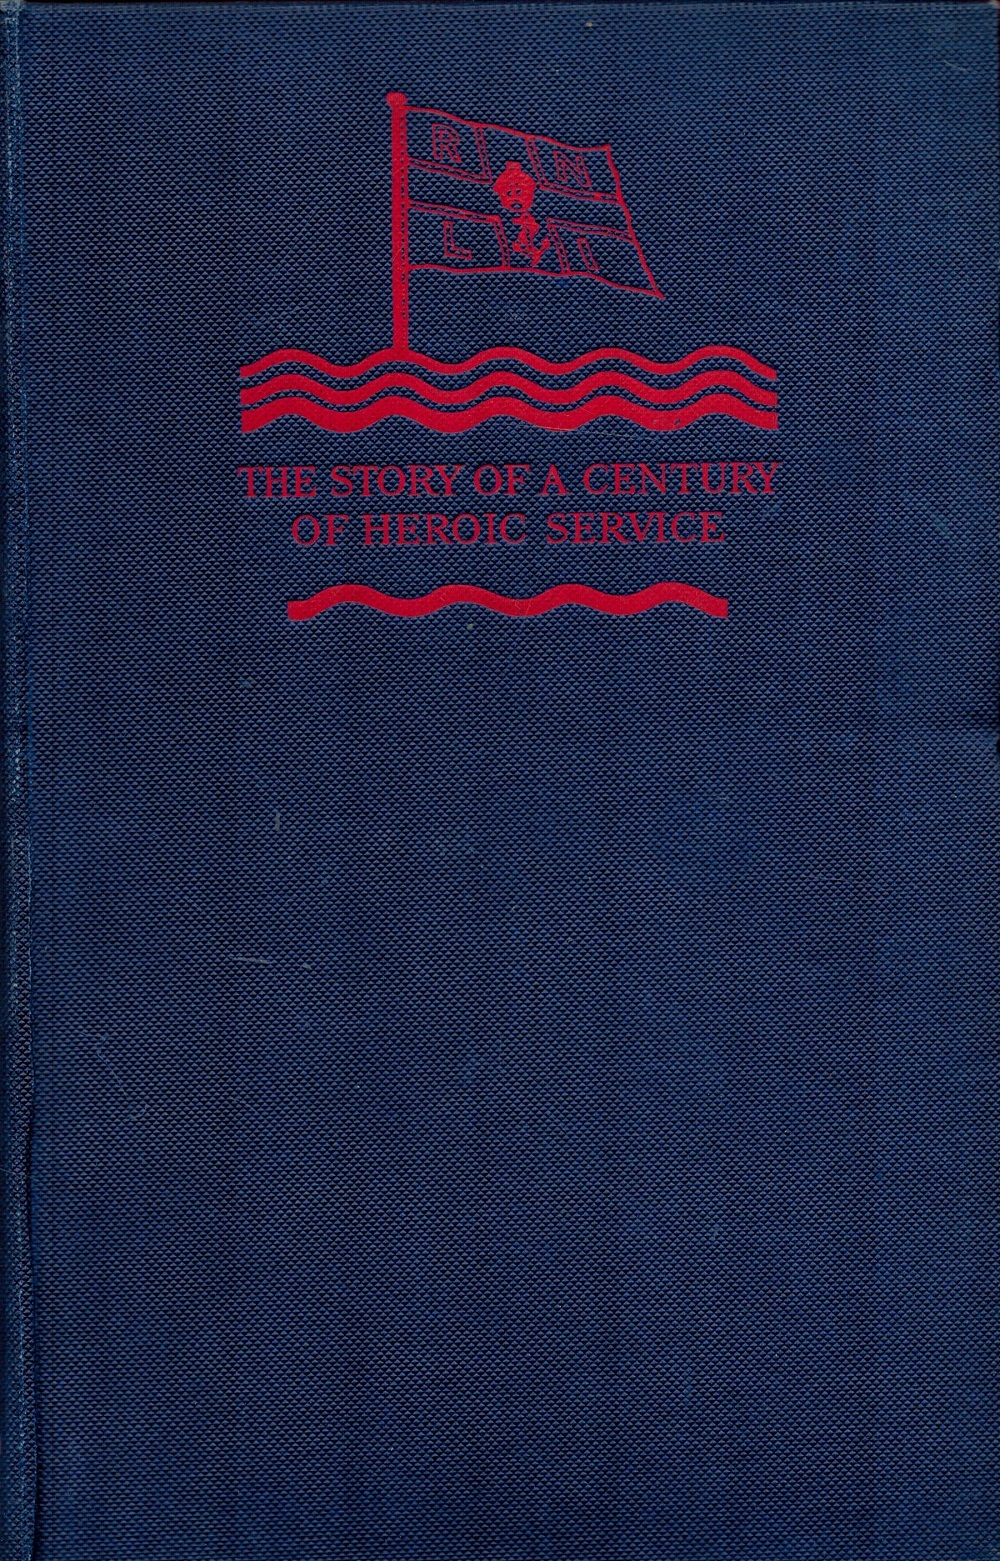 The Story of A Century of Heroic Service by Major A J Dawson 1923 Hardback Book First Edition